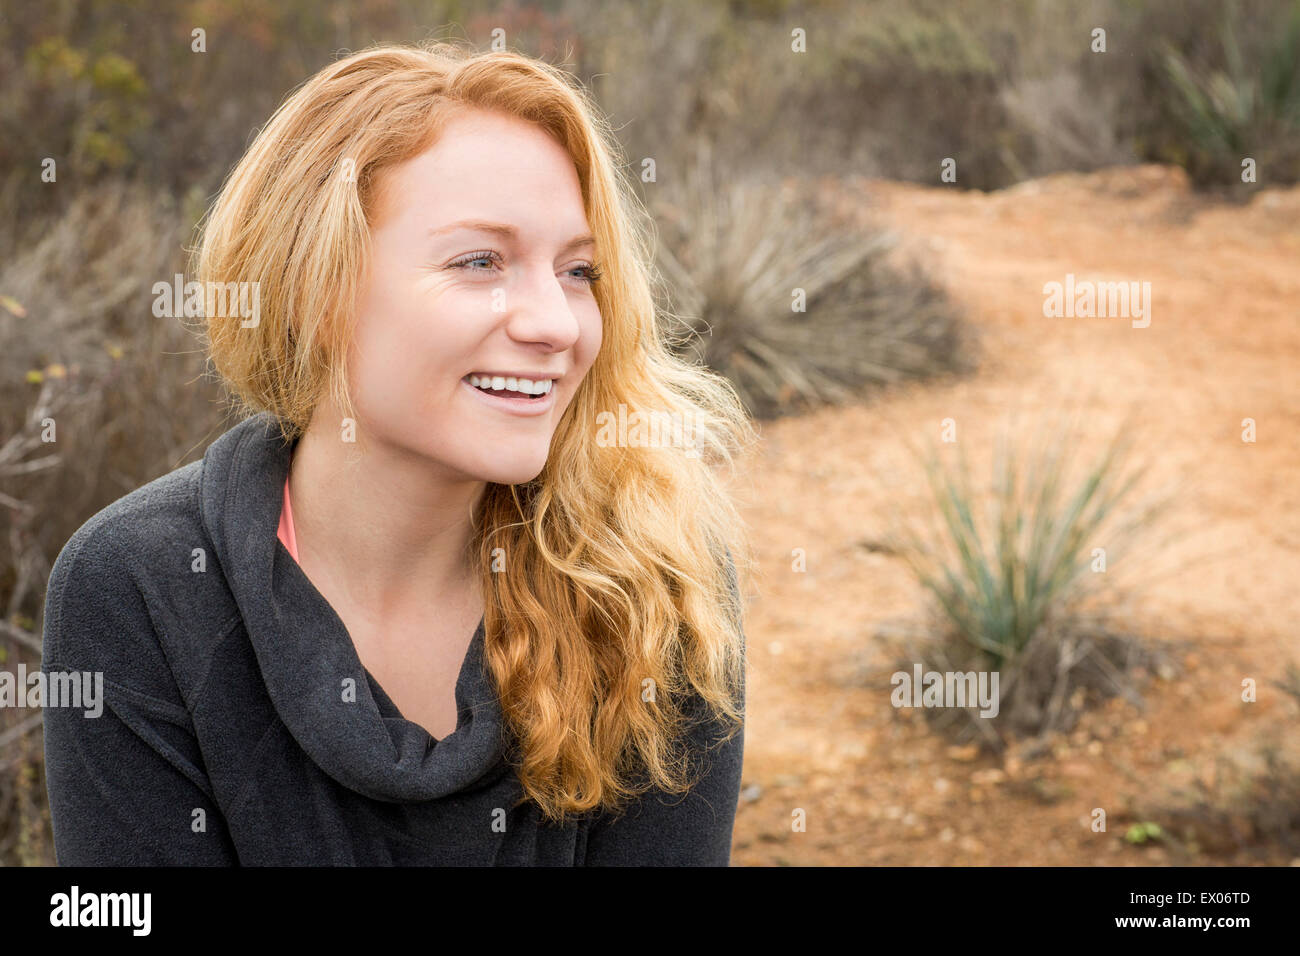 Portrait of young female hiker in landscape Stock Photo